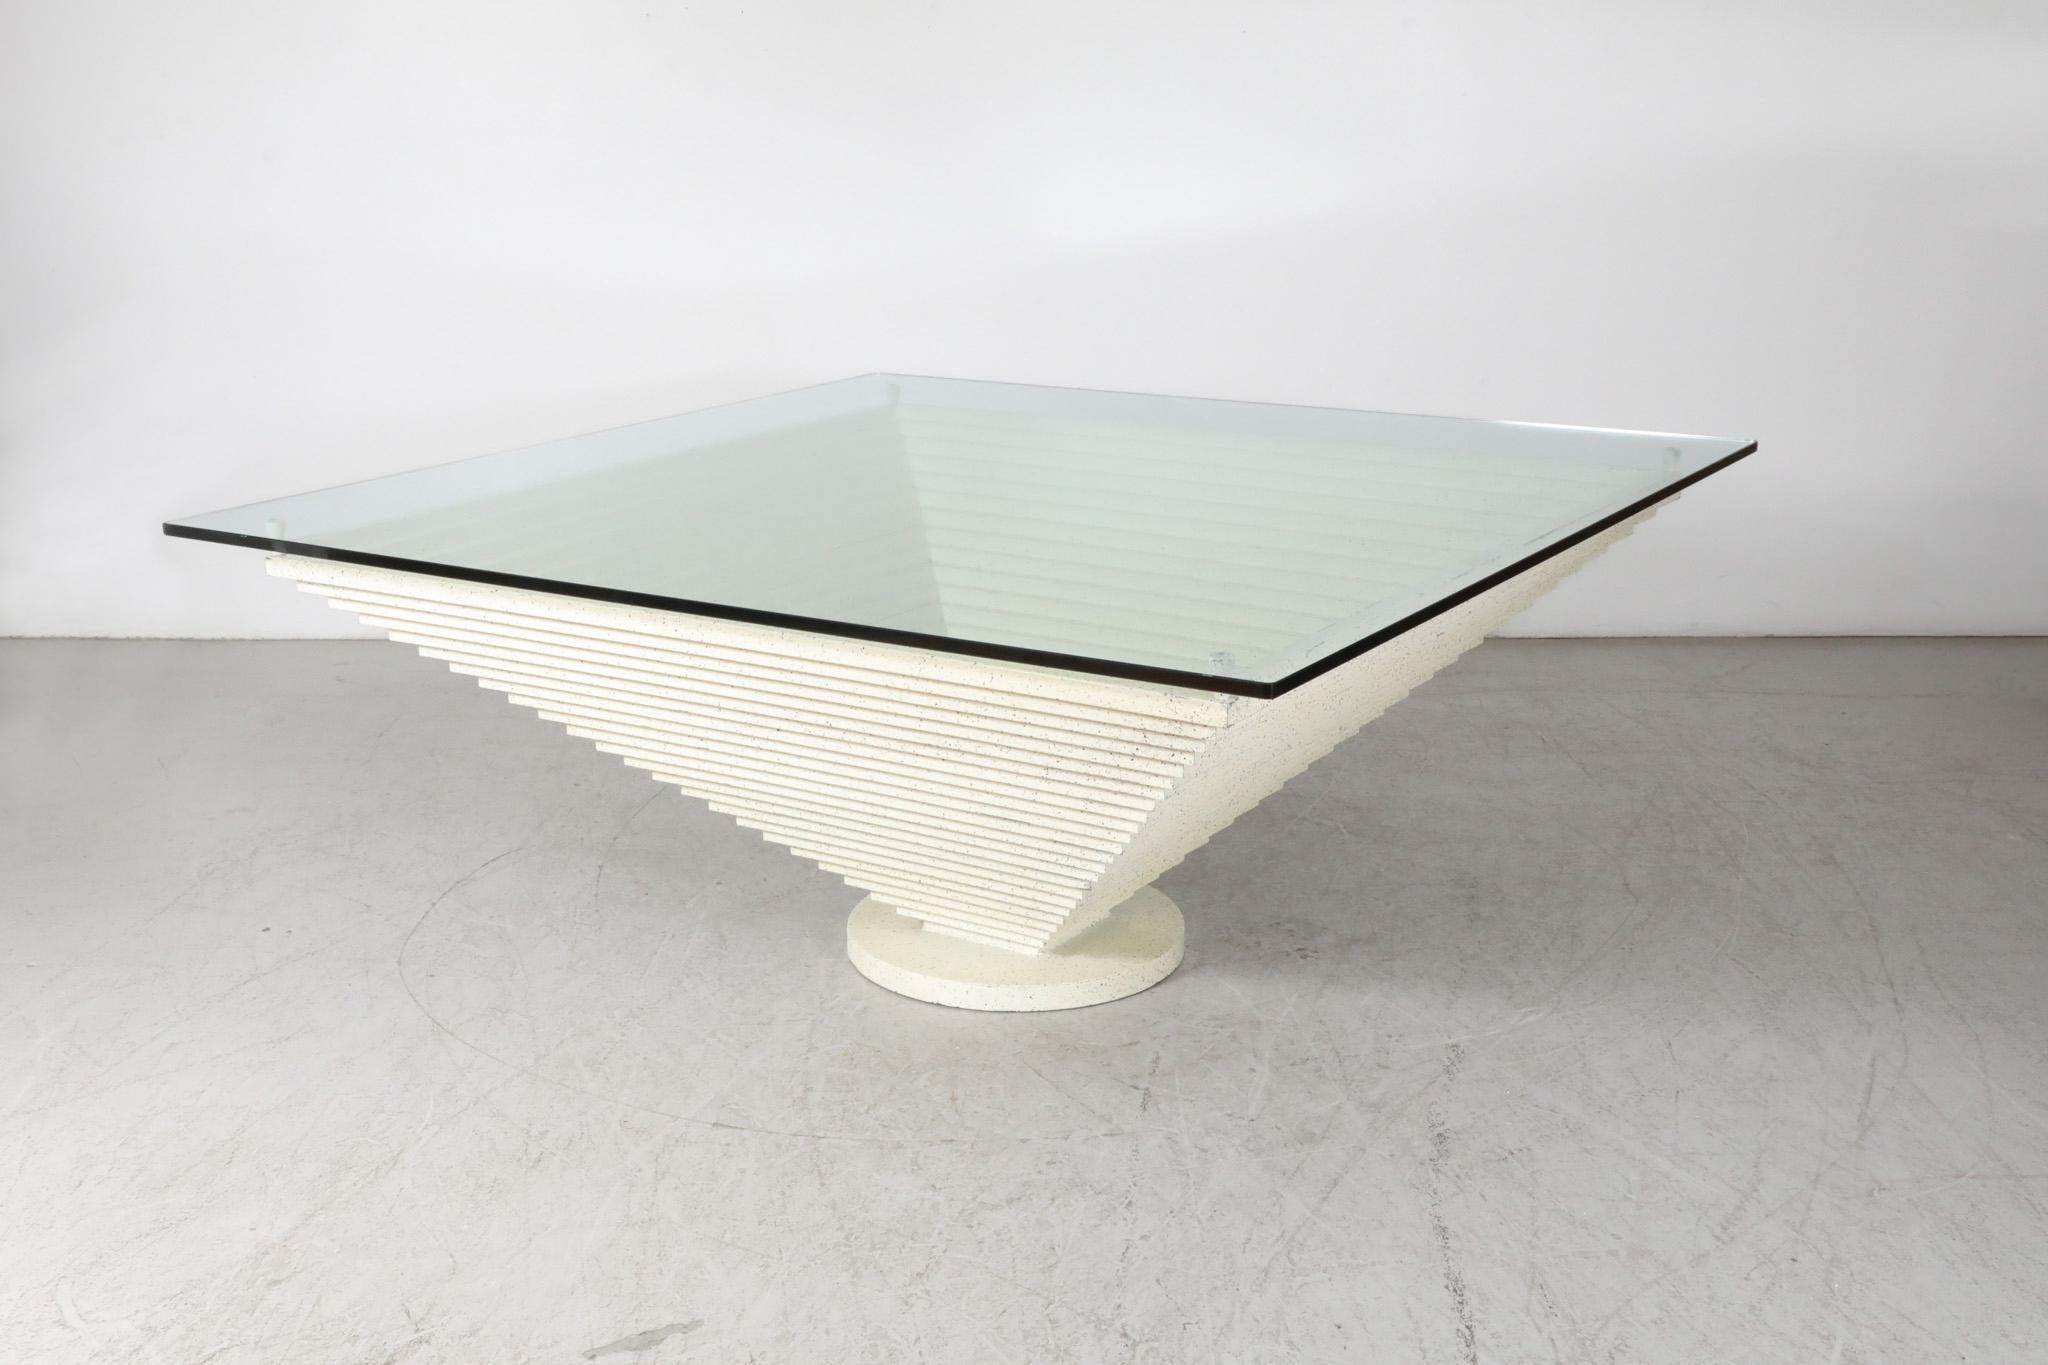 European Giant Modernist Memphis Speckled Cream & Black Pyramid Table w/ Glass Top, 1980s For Sale